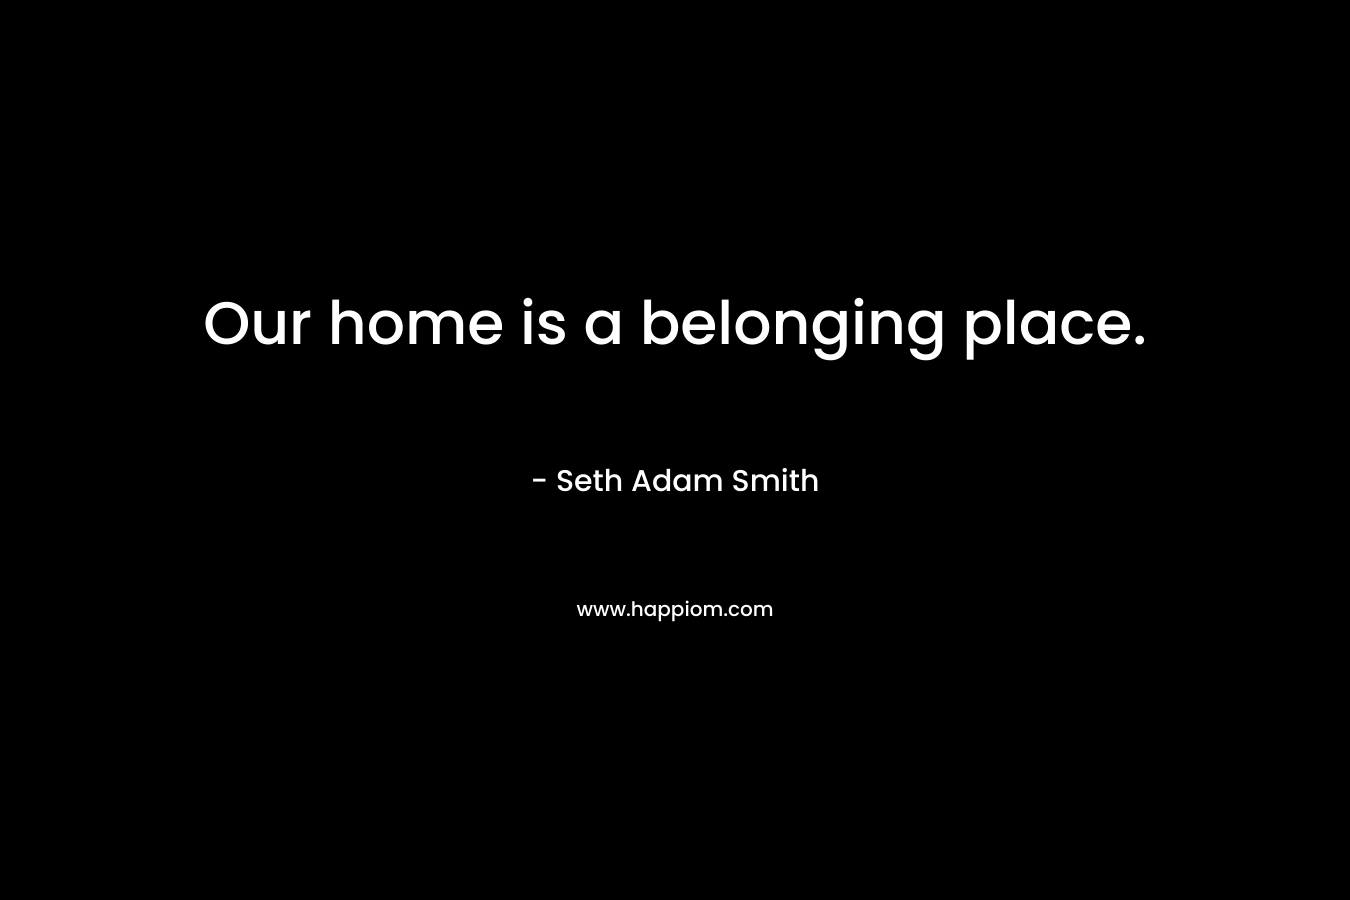 Our home is a belonging place.